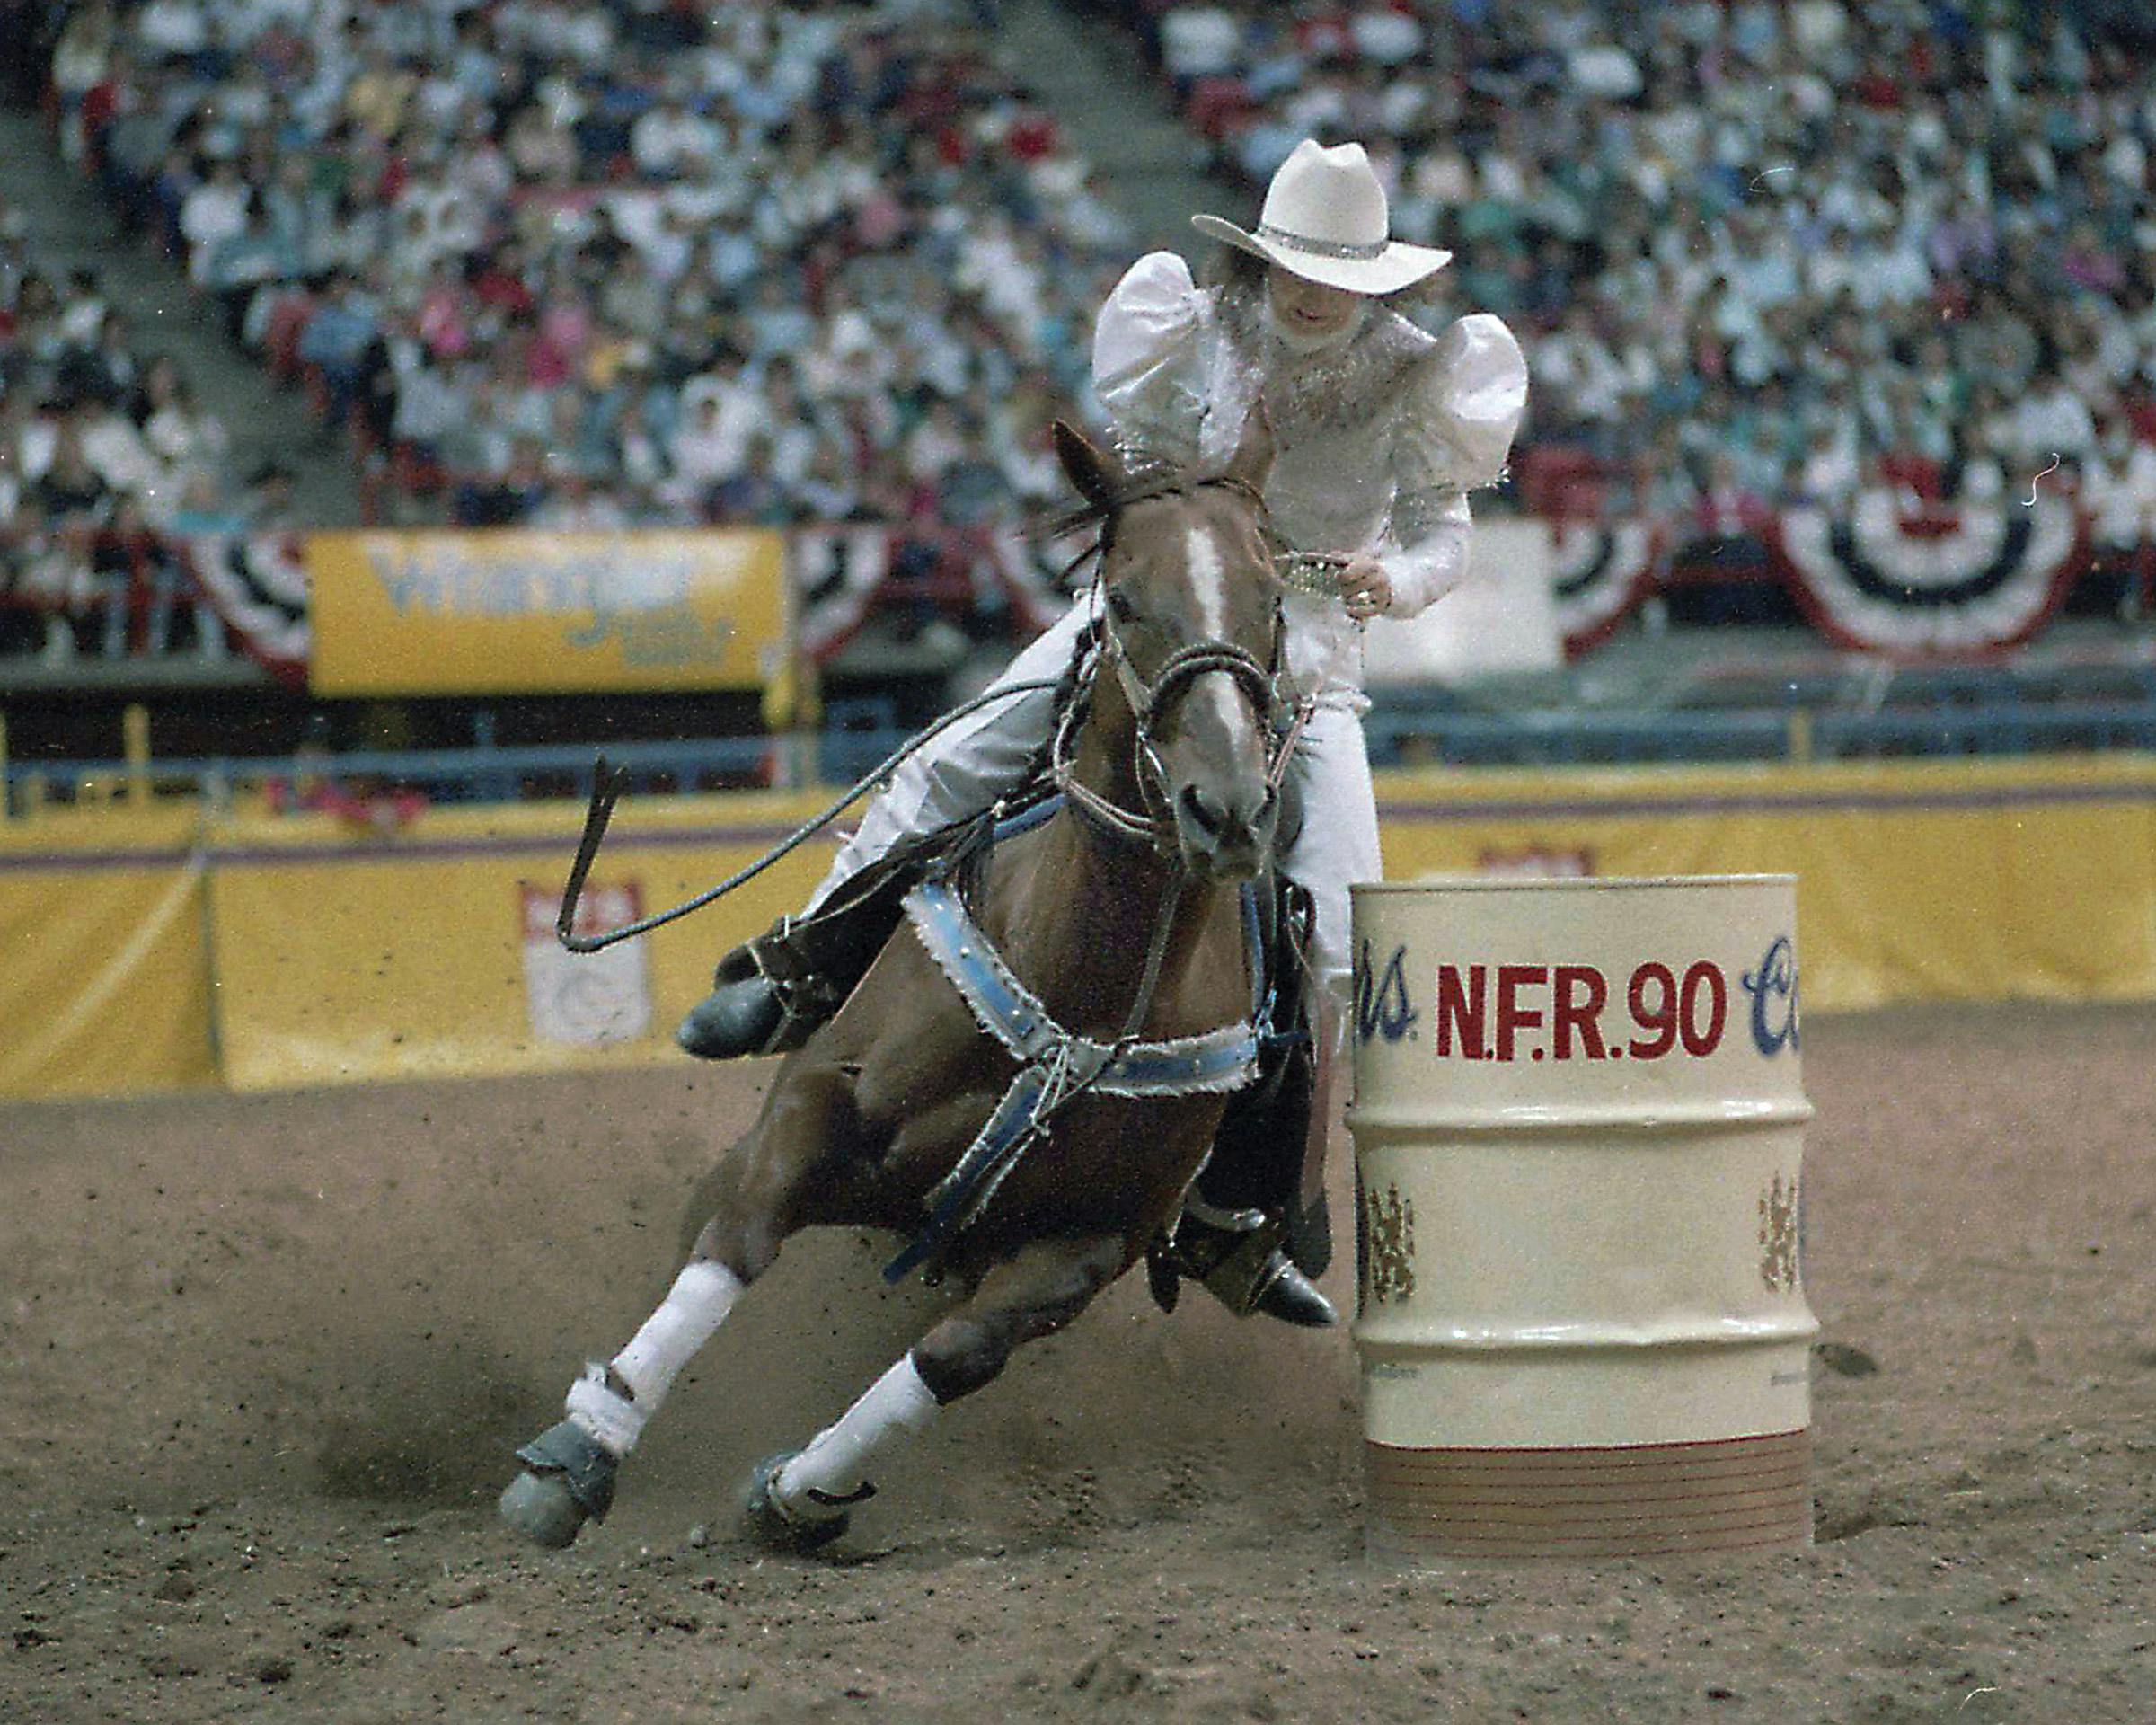 Martha competing in the outfit she had fashioned out of a wedding dress, at the 1990 National Finals Rodeo.